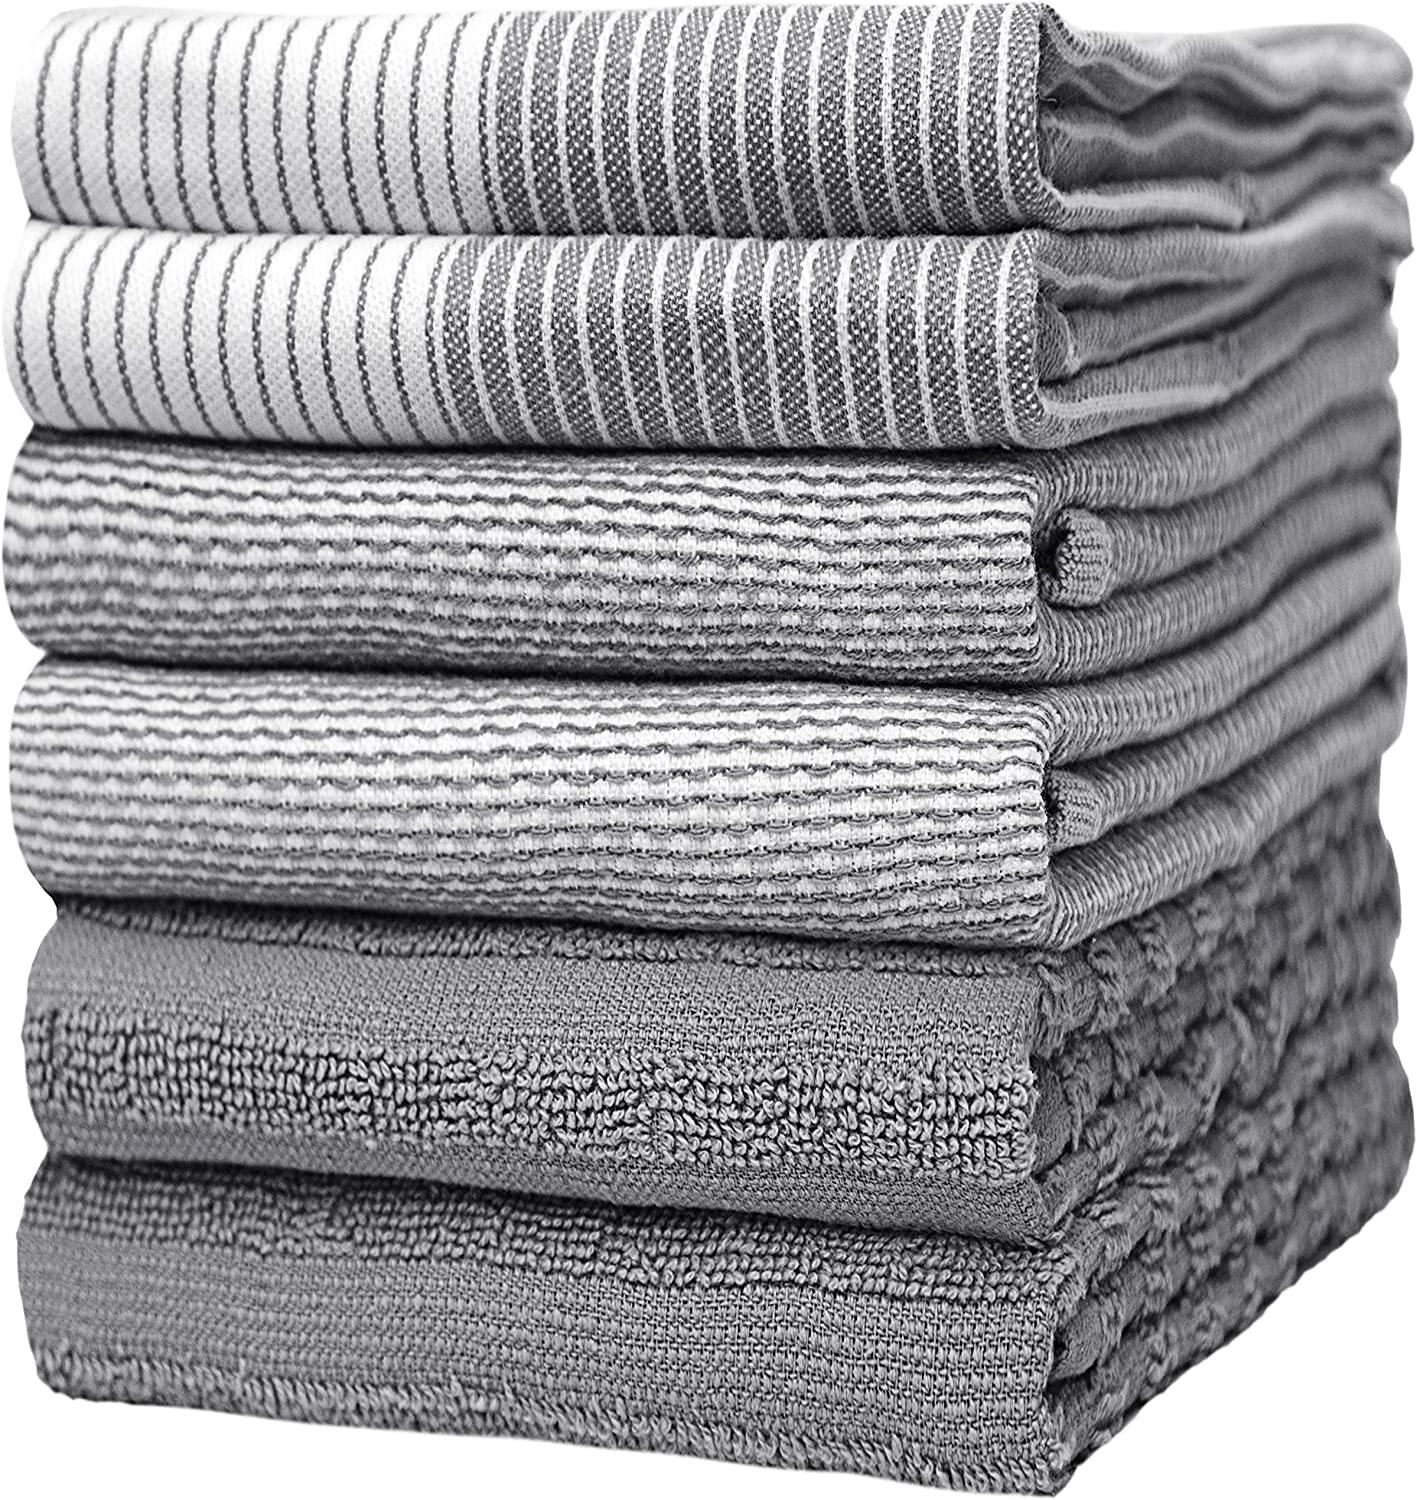 https://www.dontwasteyourmoney.com/wp-content/uploads/2022/10/bumble-towels-ultra-soft-eco-friendly-dish-towels-6-pack-dish-towel.jpg